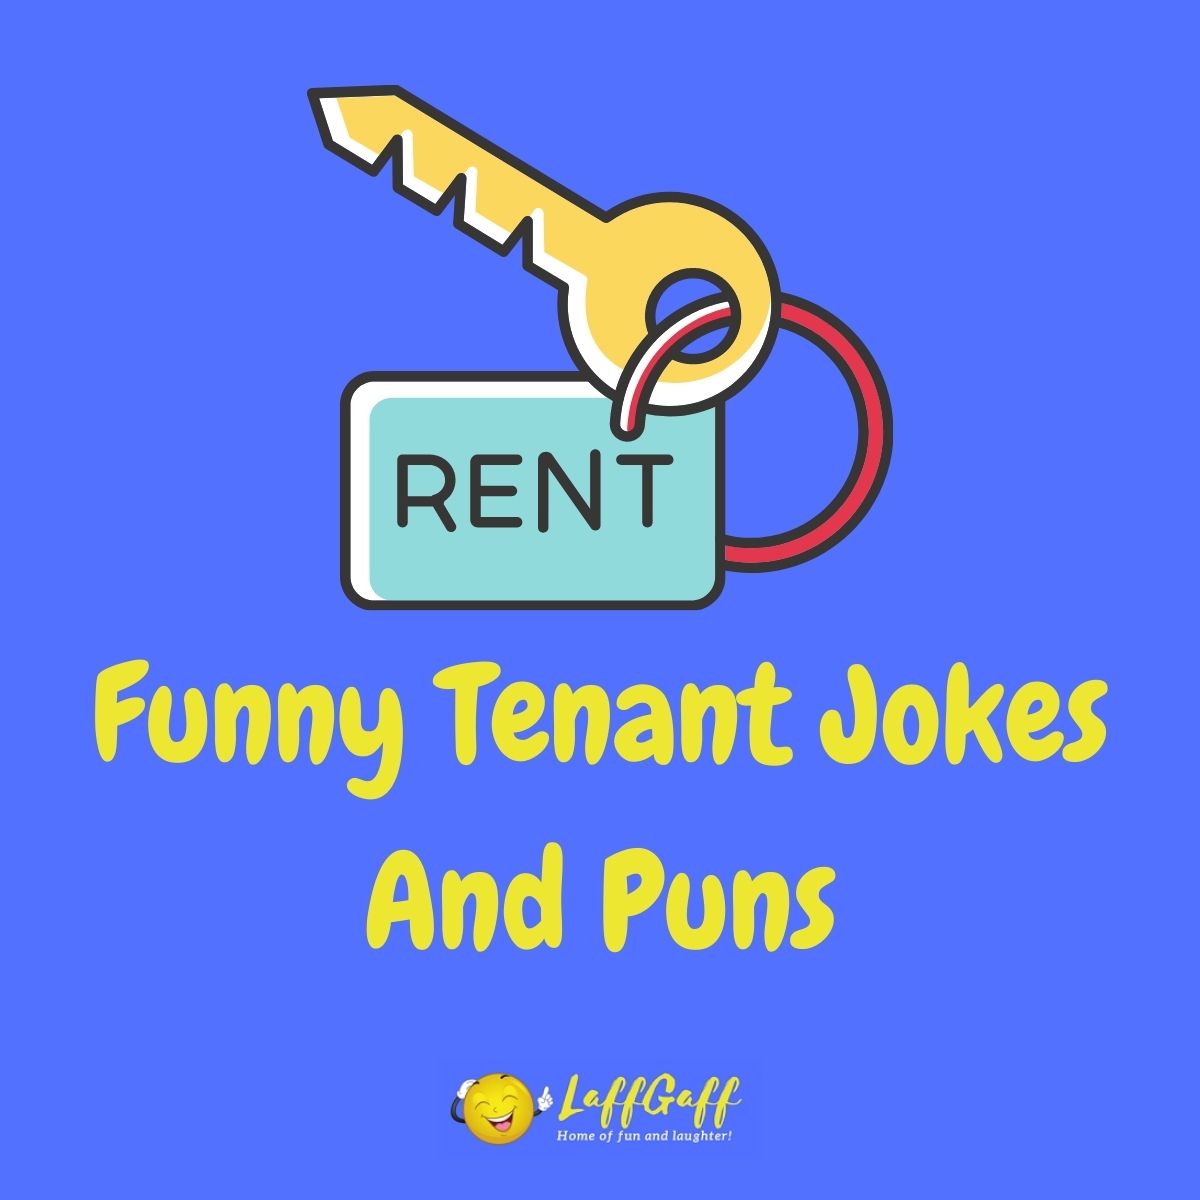 Featured image for a page of funny tenant jokes and puns.